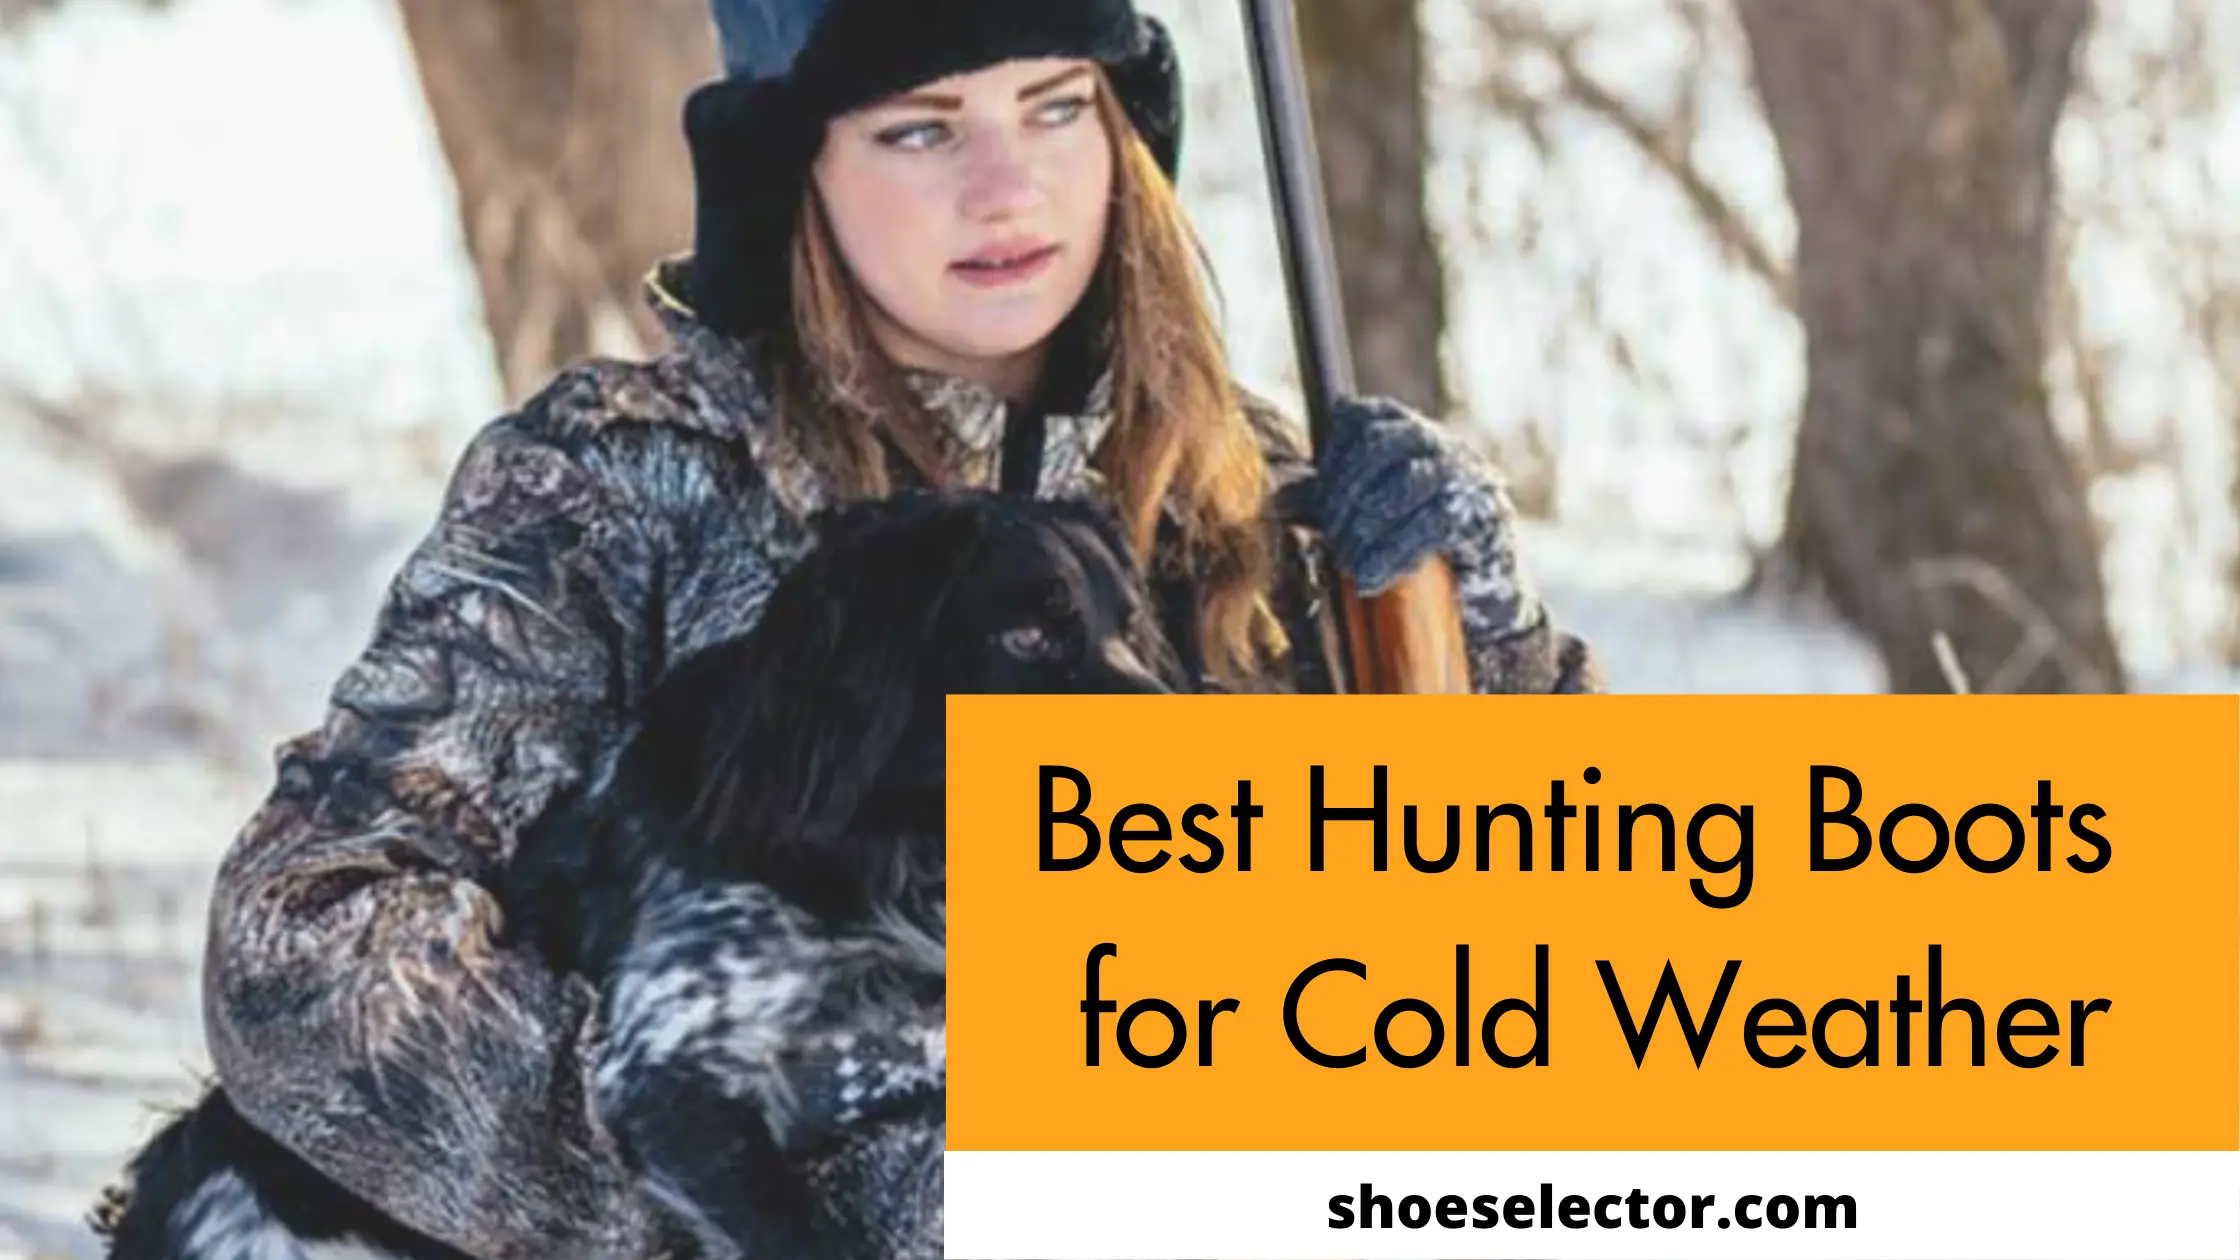 Best Hunting Boots For Cold Weather - Complete Shopping Tips